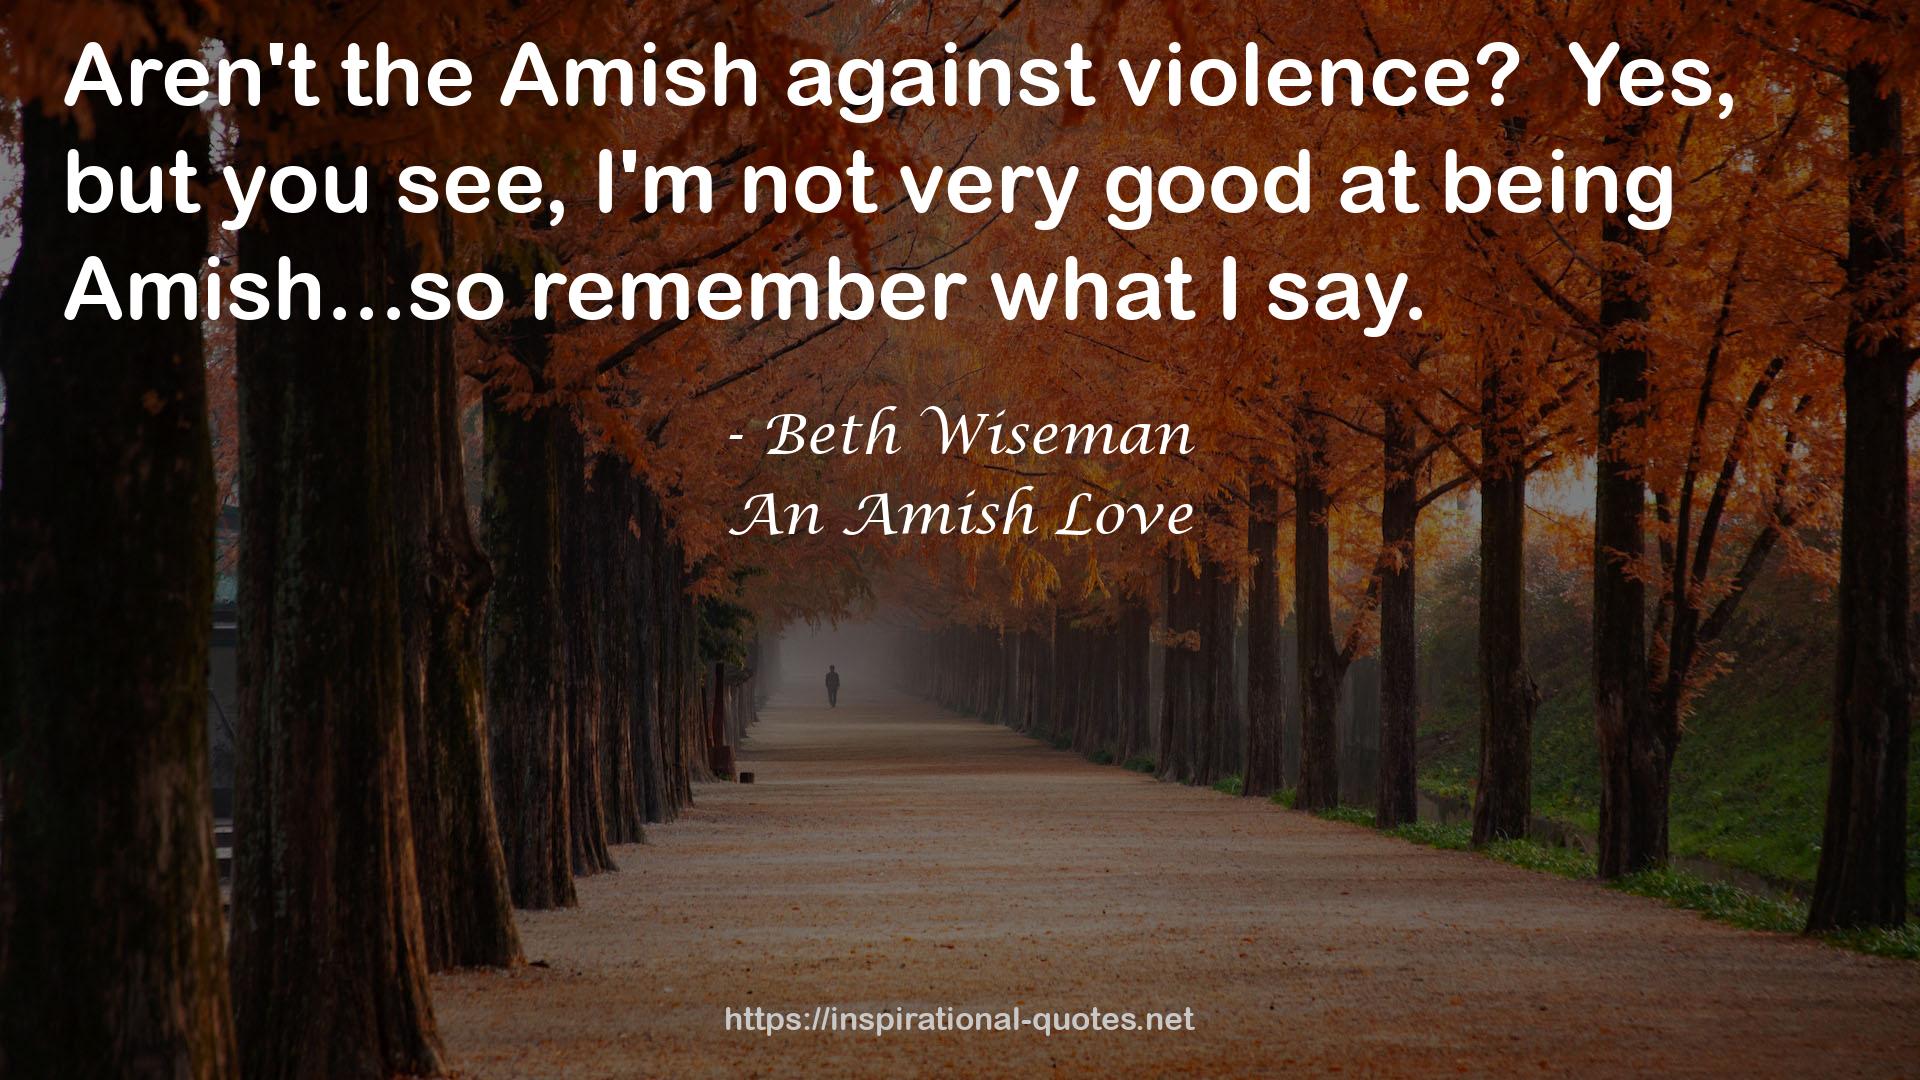 An Amish Love QUOTES